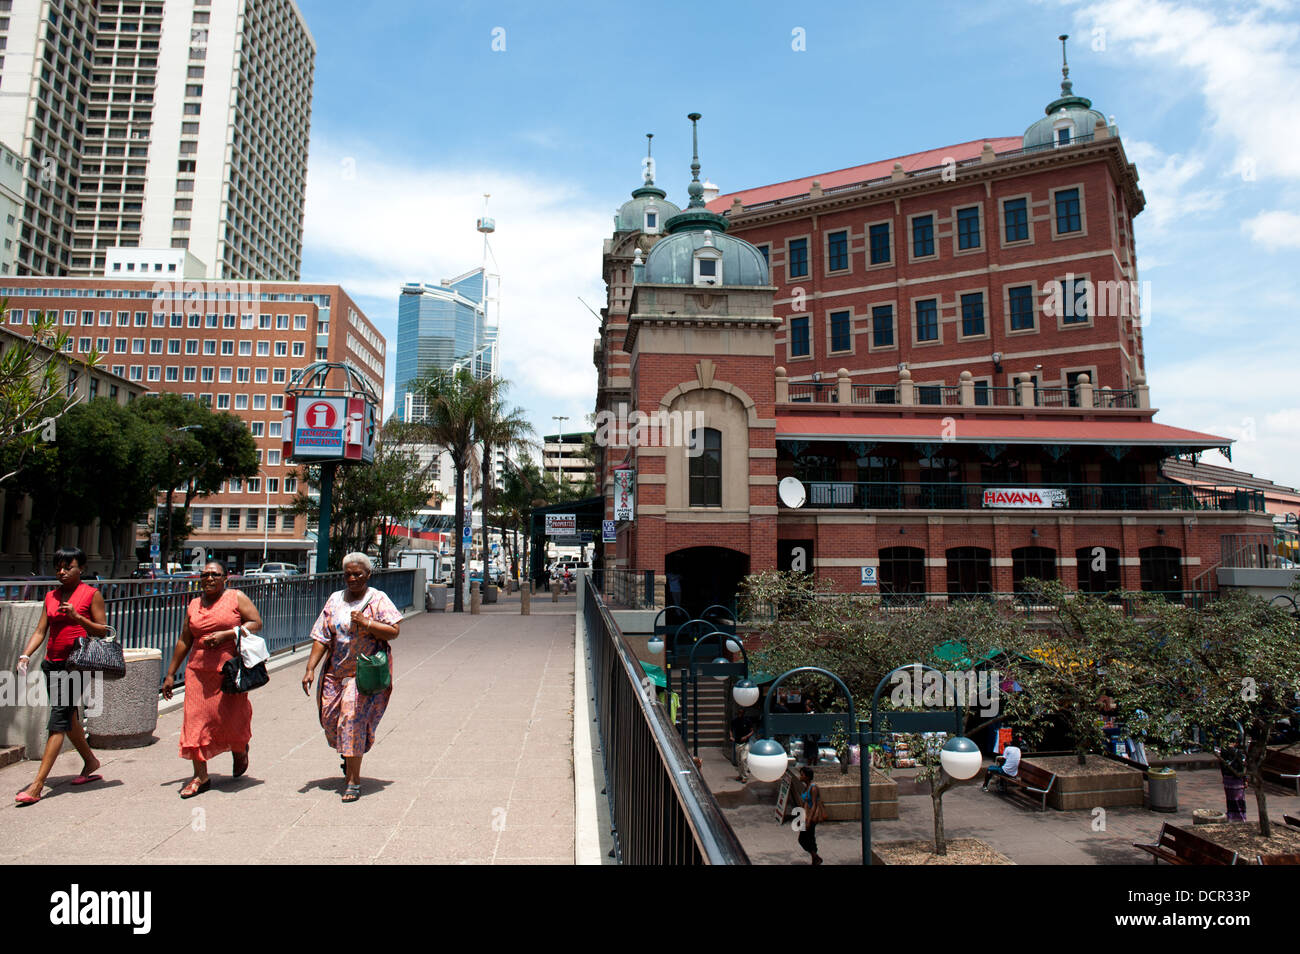 The Colourful South African Gateway City of Durban